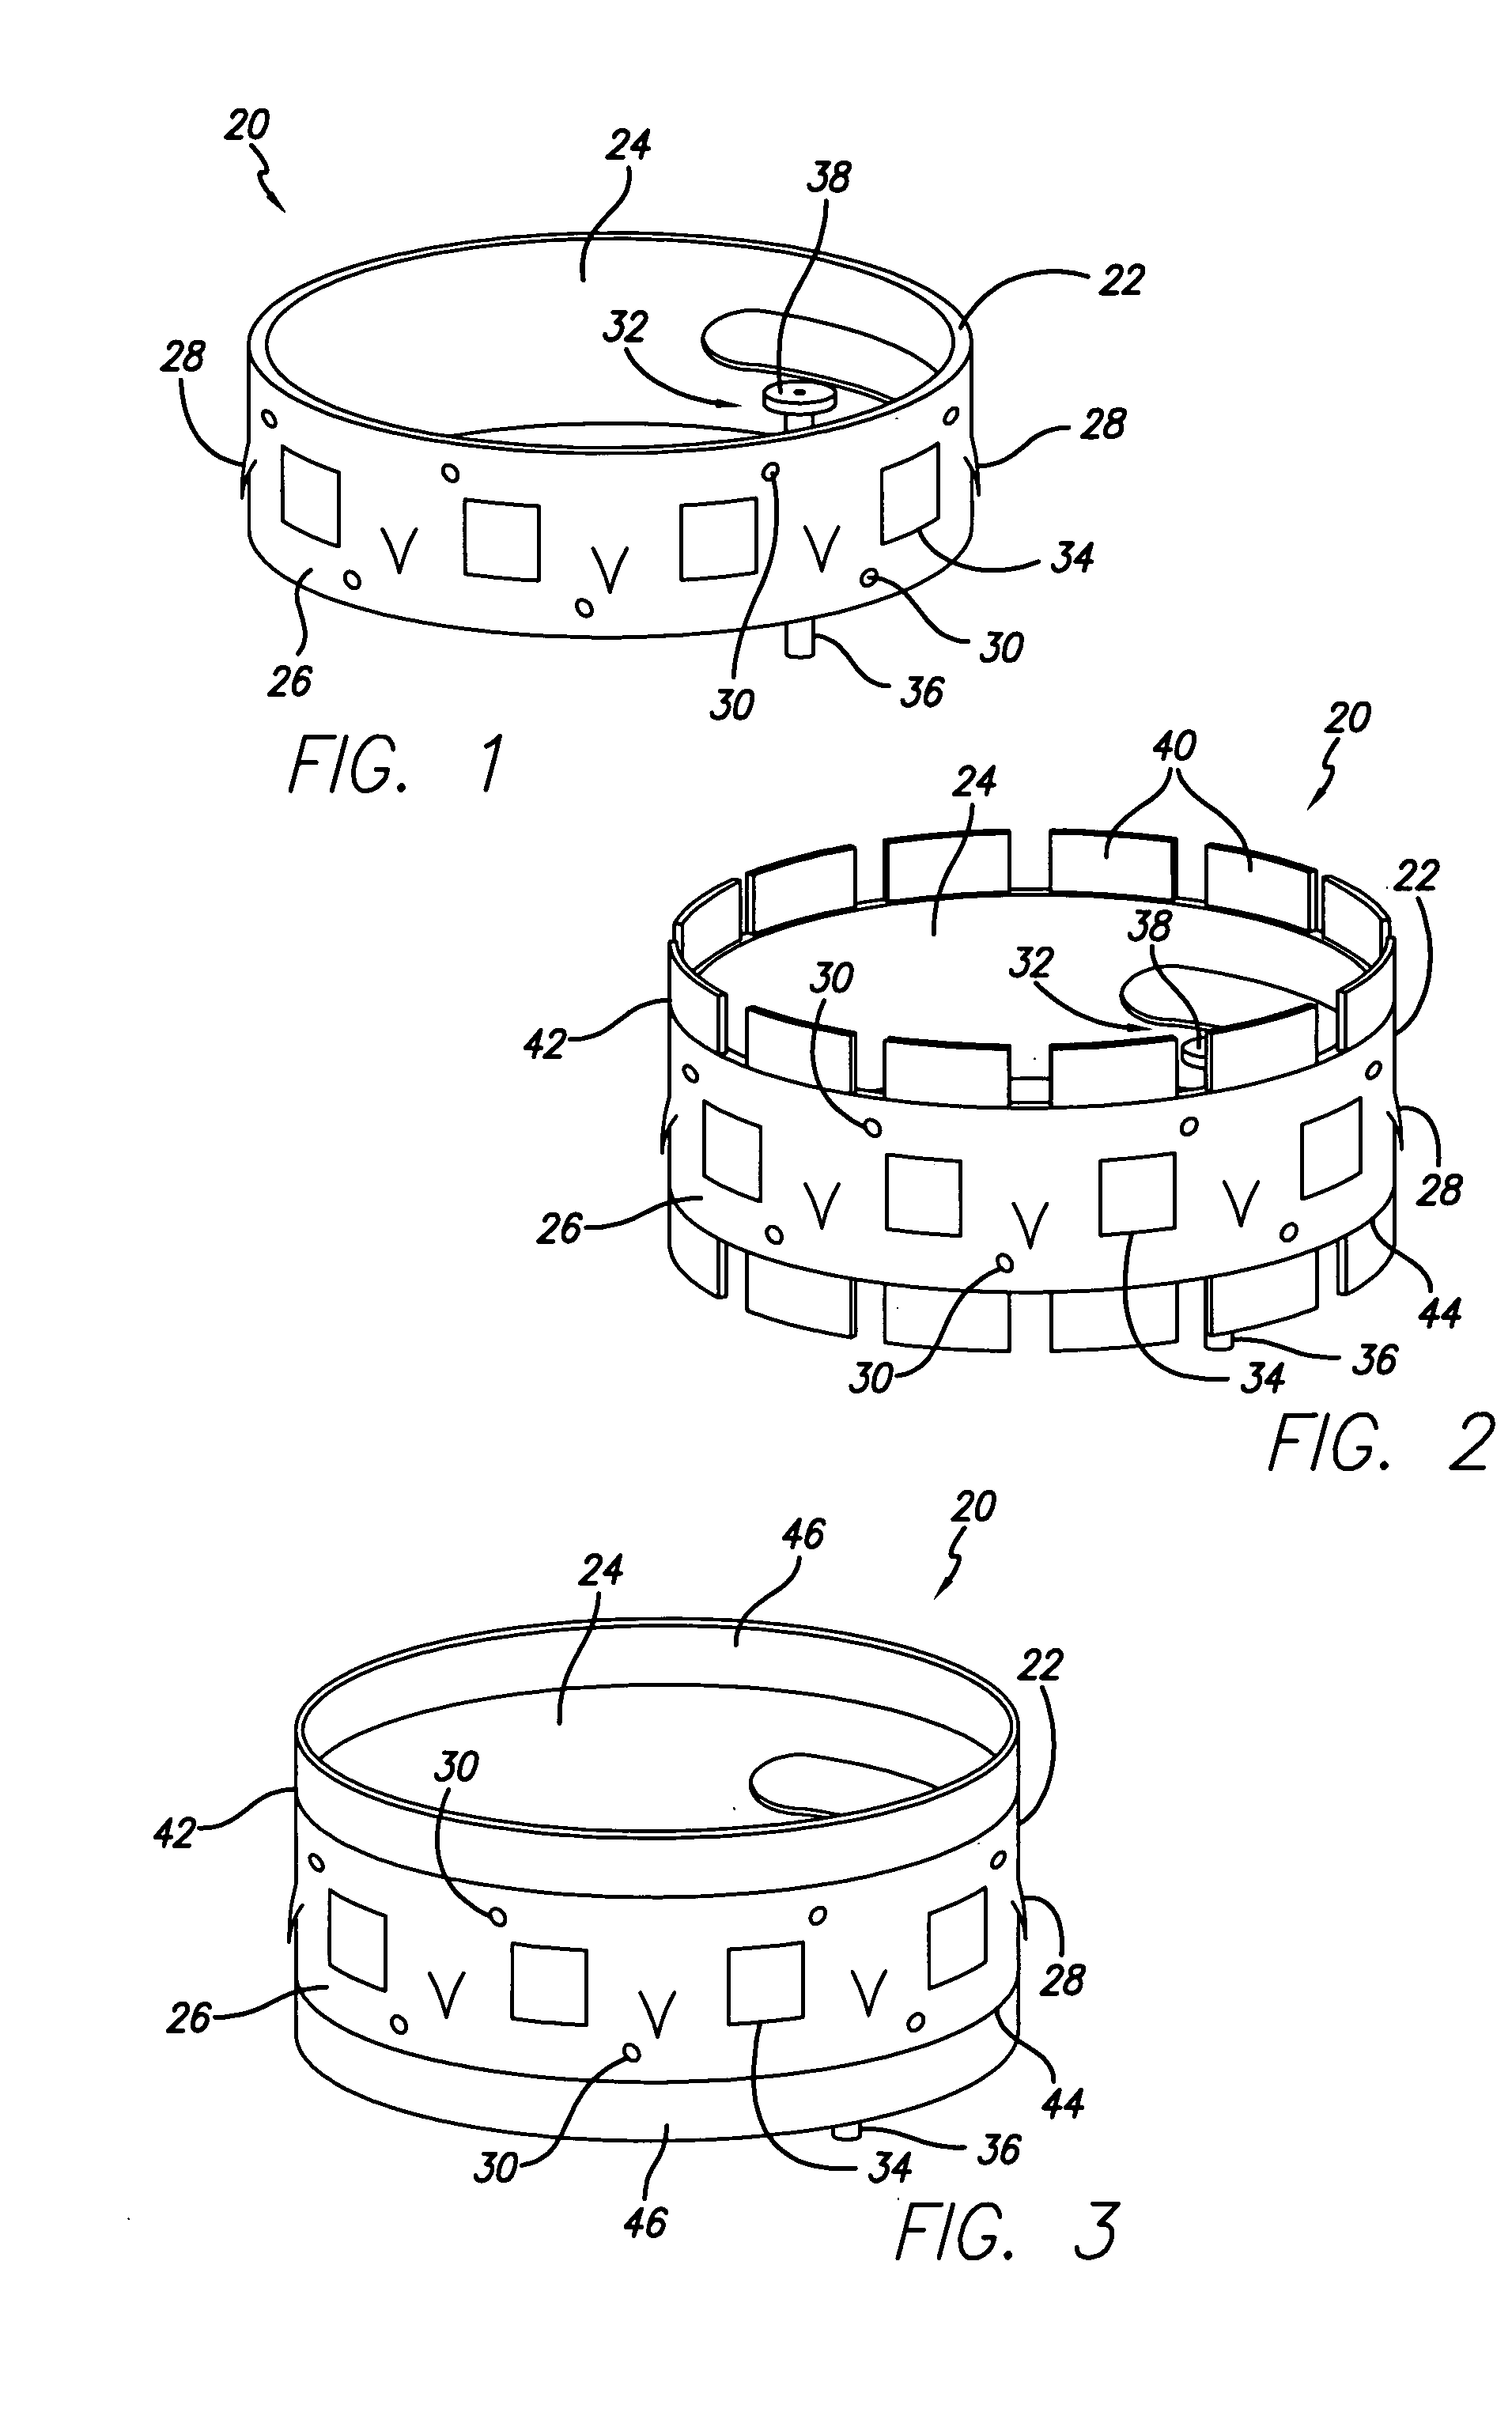 Methods and devices for reducing hollow organ volume